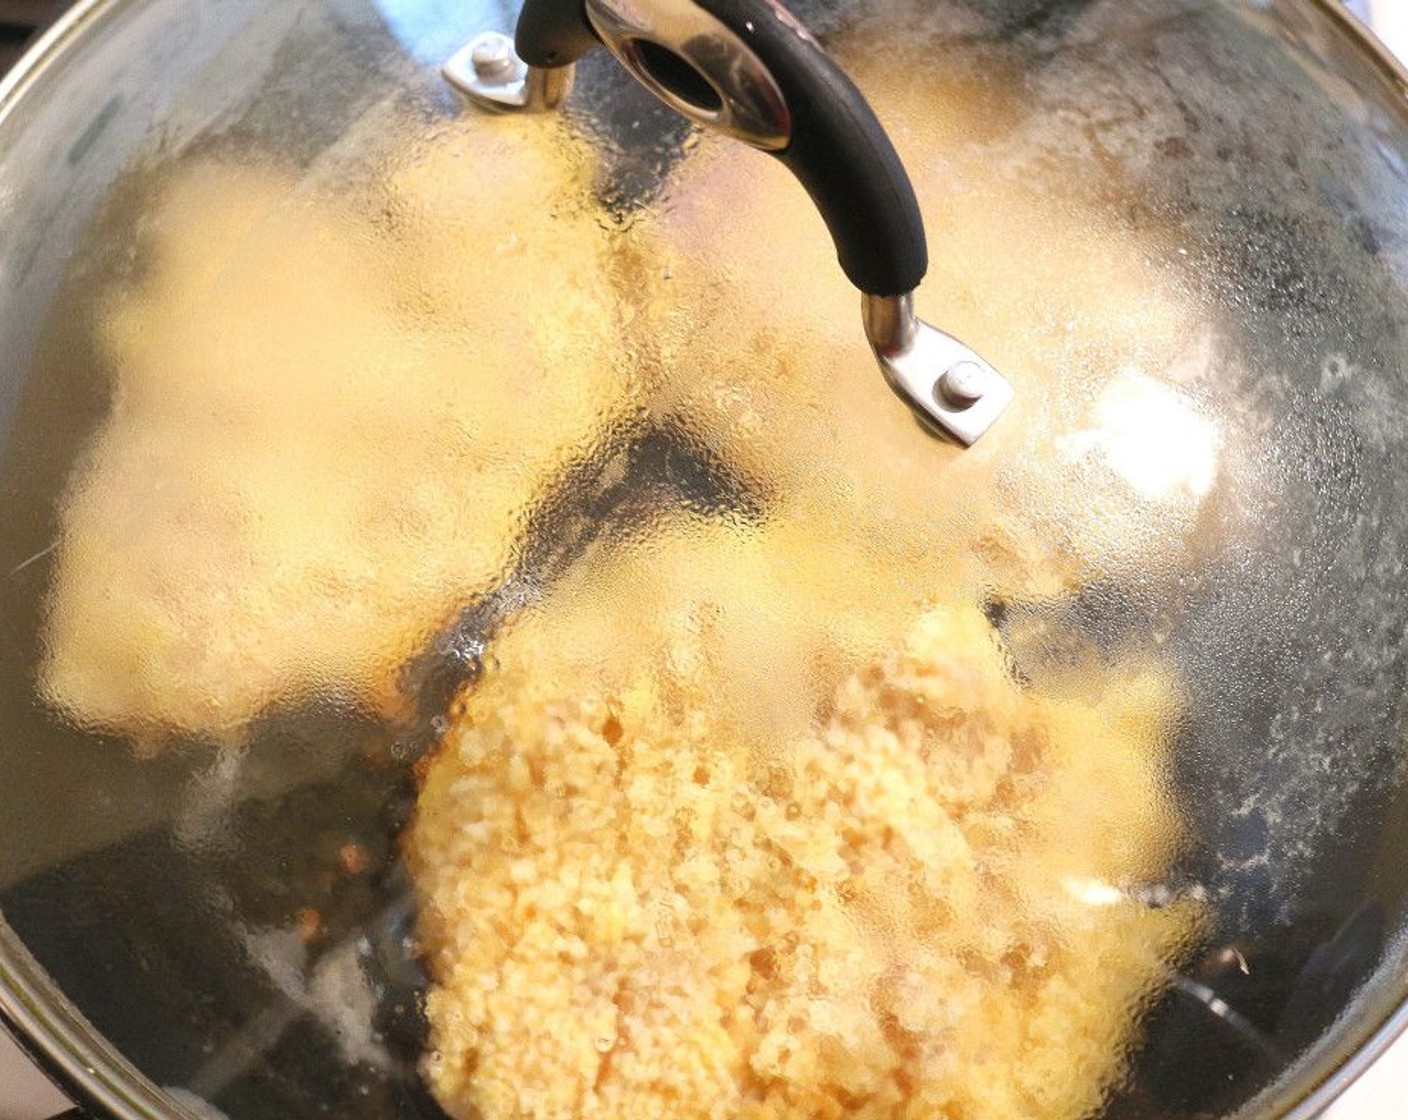 step 7 Fry in hot Peanut Oil (1/2 cup) – if the breasts are if very thick, cook on the first side covered, then uncover and flip.